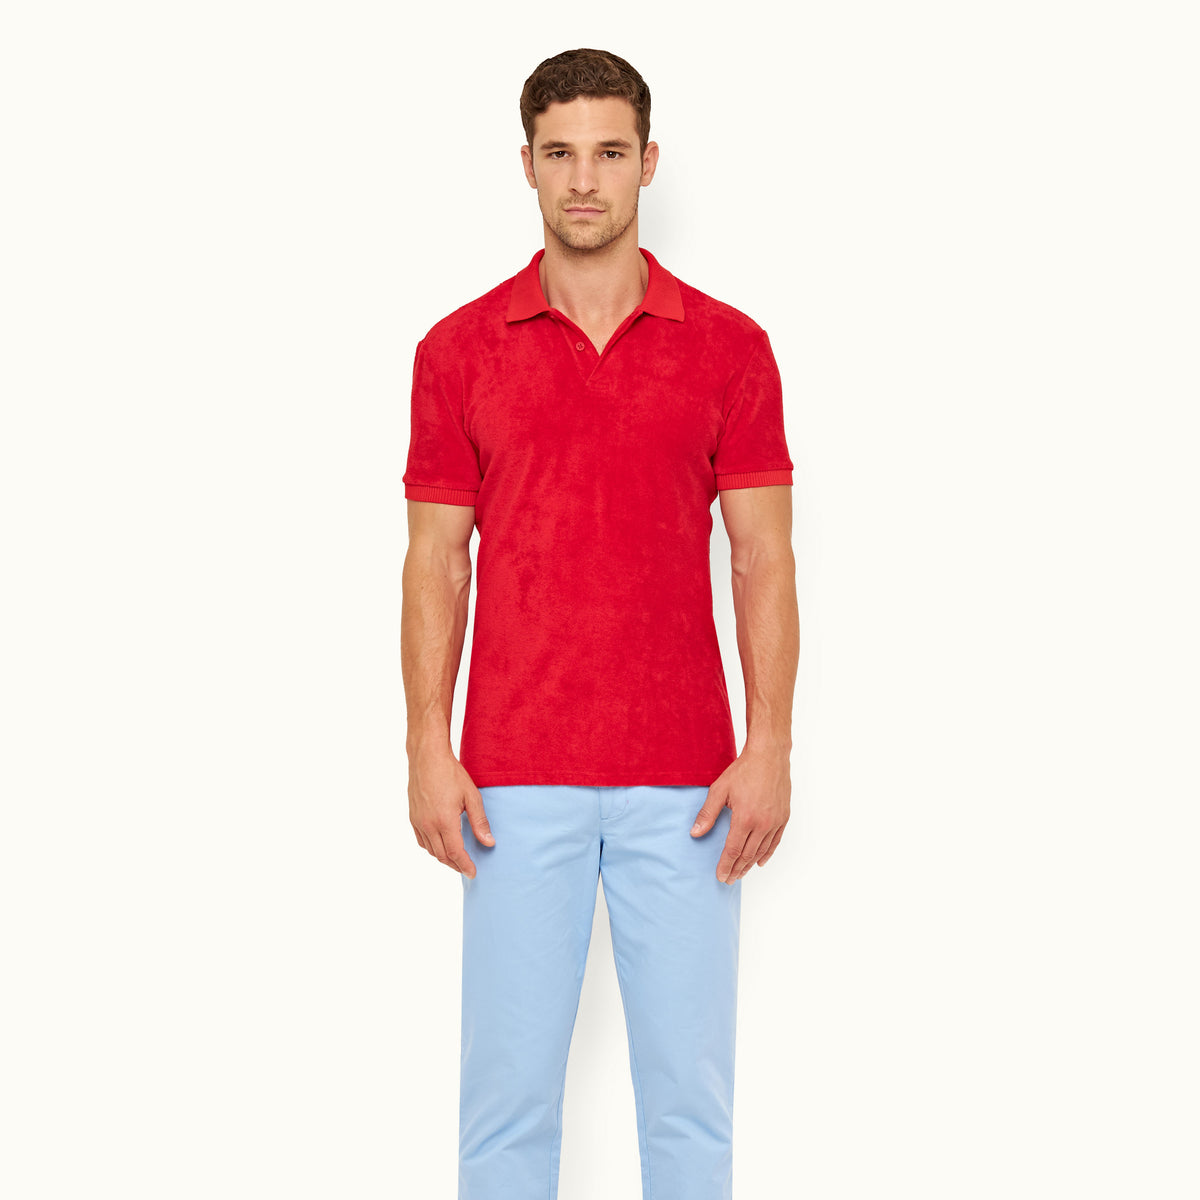 James Bond Red Towelling Polo Shirt - Dr. No Edition - By Orlebar Brown